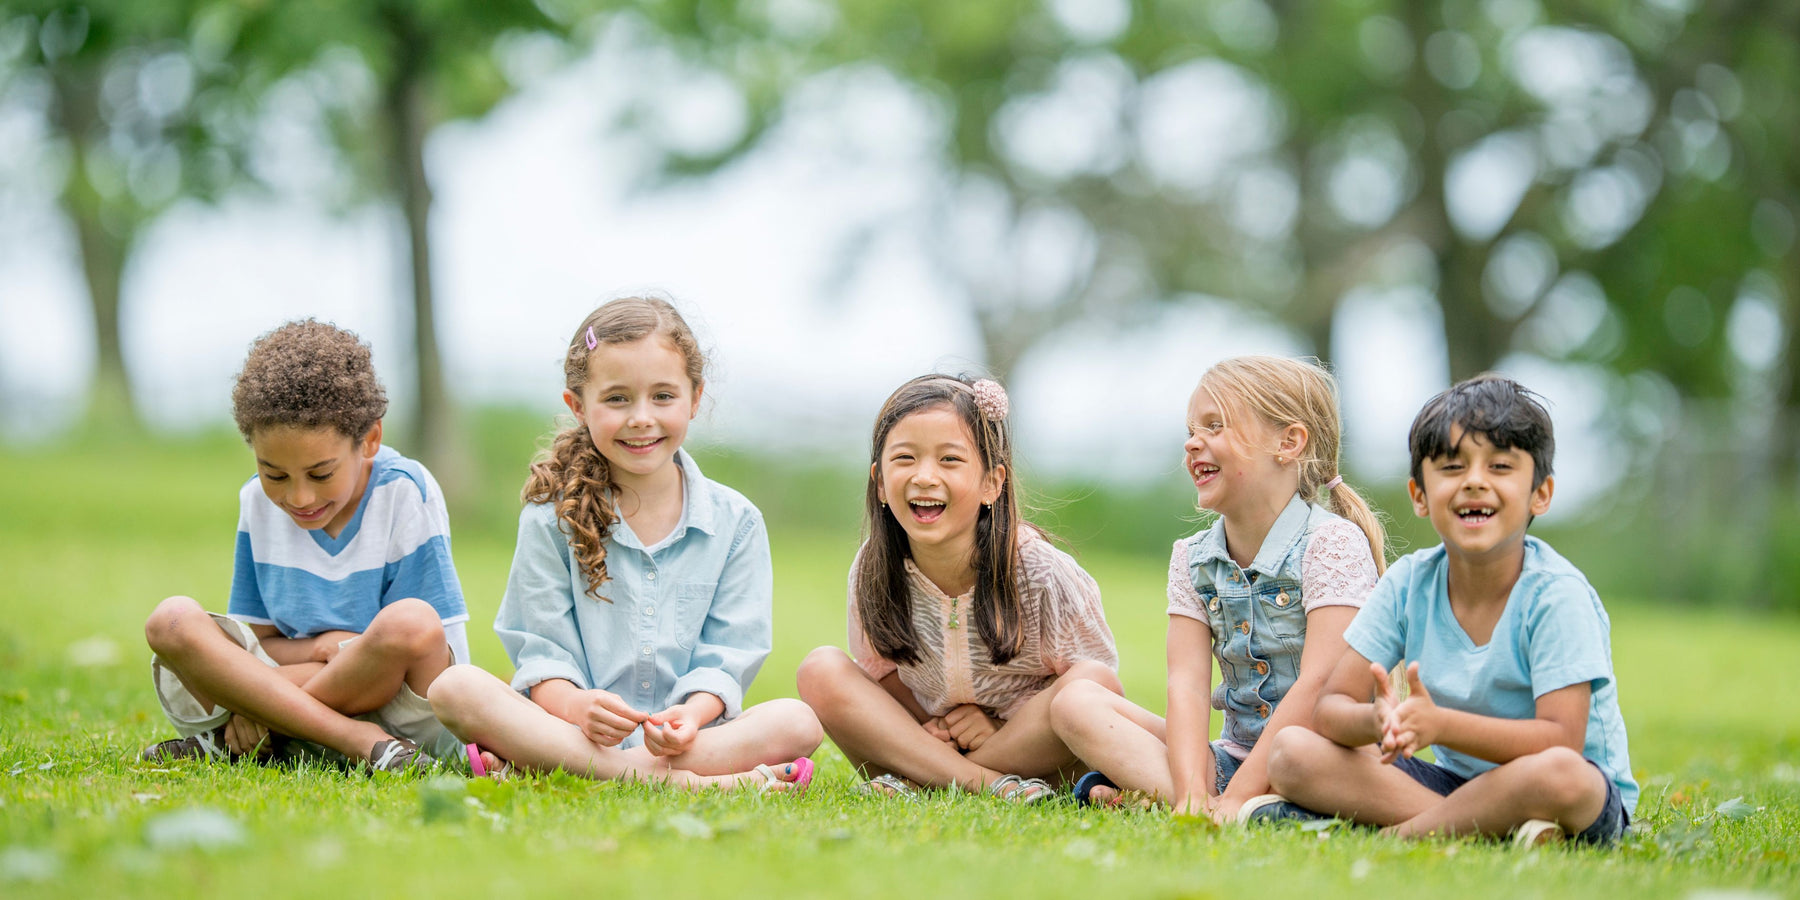 5 children sitting on the grass. Toy store NZ, Toy Shop Auckland, Toy Shop Christchurch, Toy Shop Wellington, Toy shop Dunedin, Toy world, Toy Co, Toys r us.